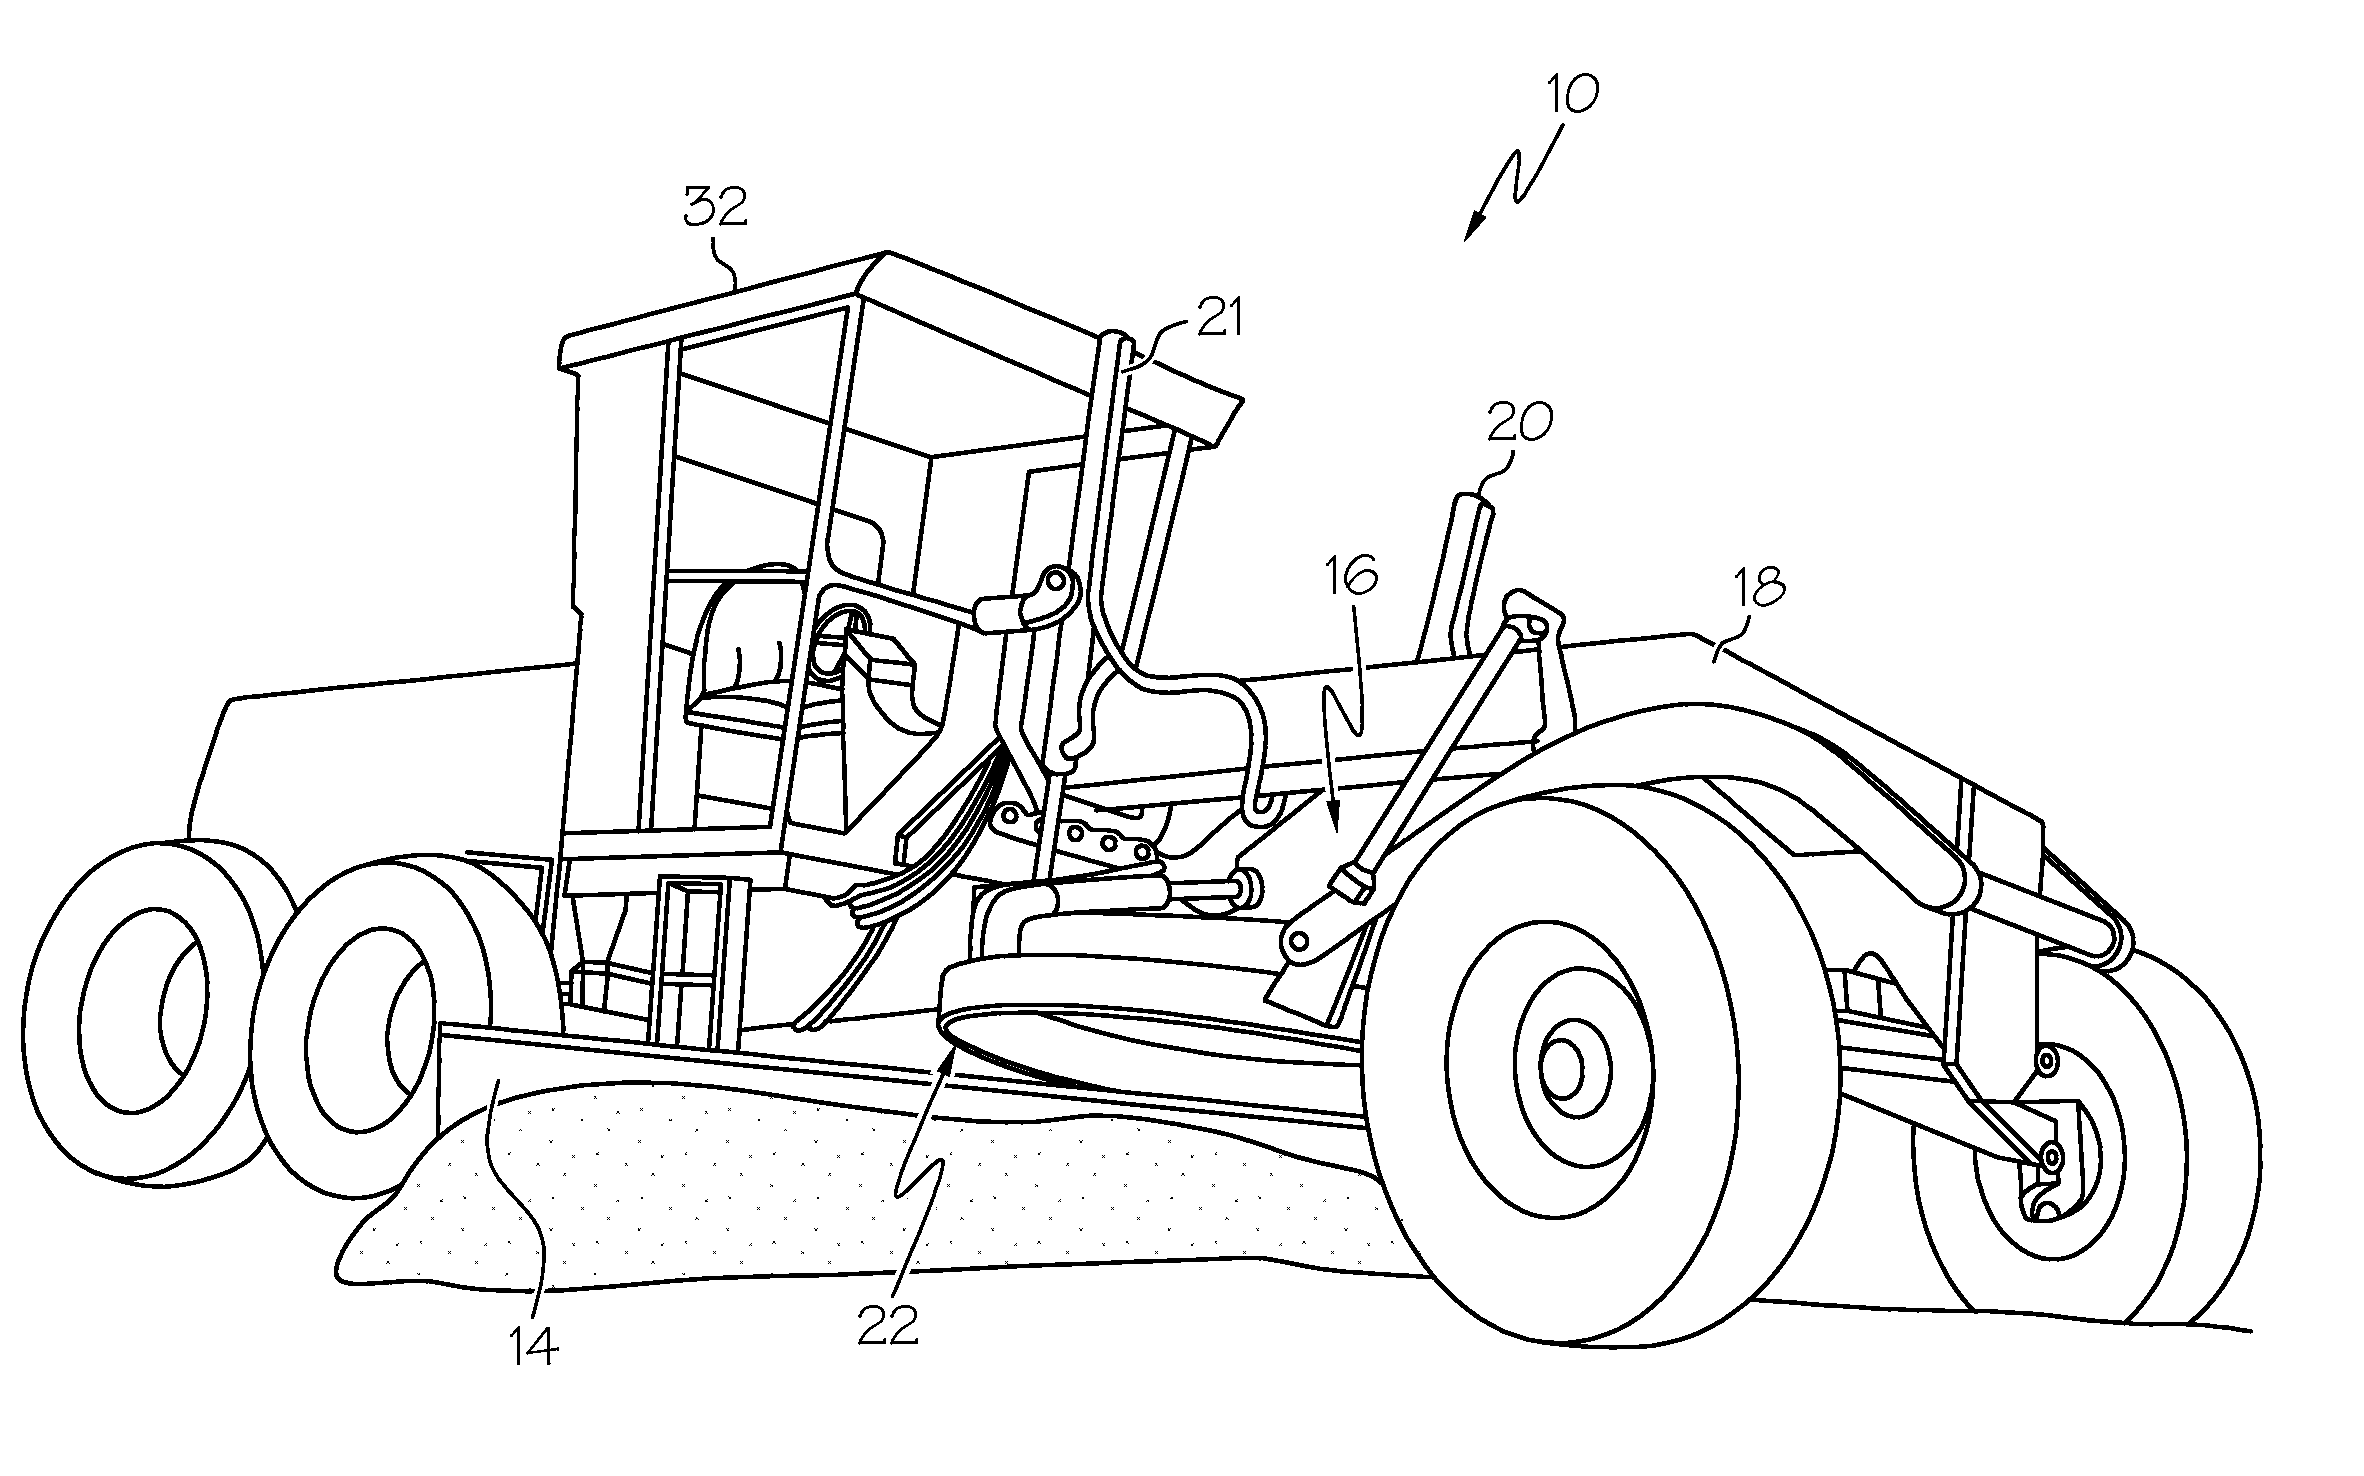 Motor grader and control system therefore